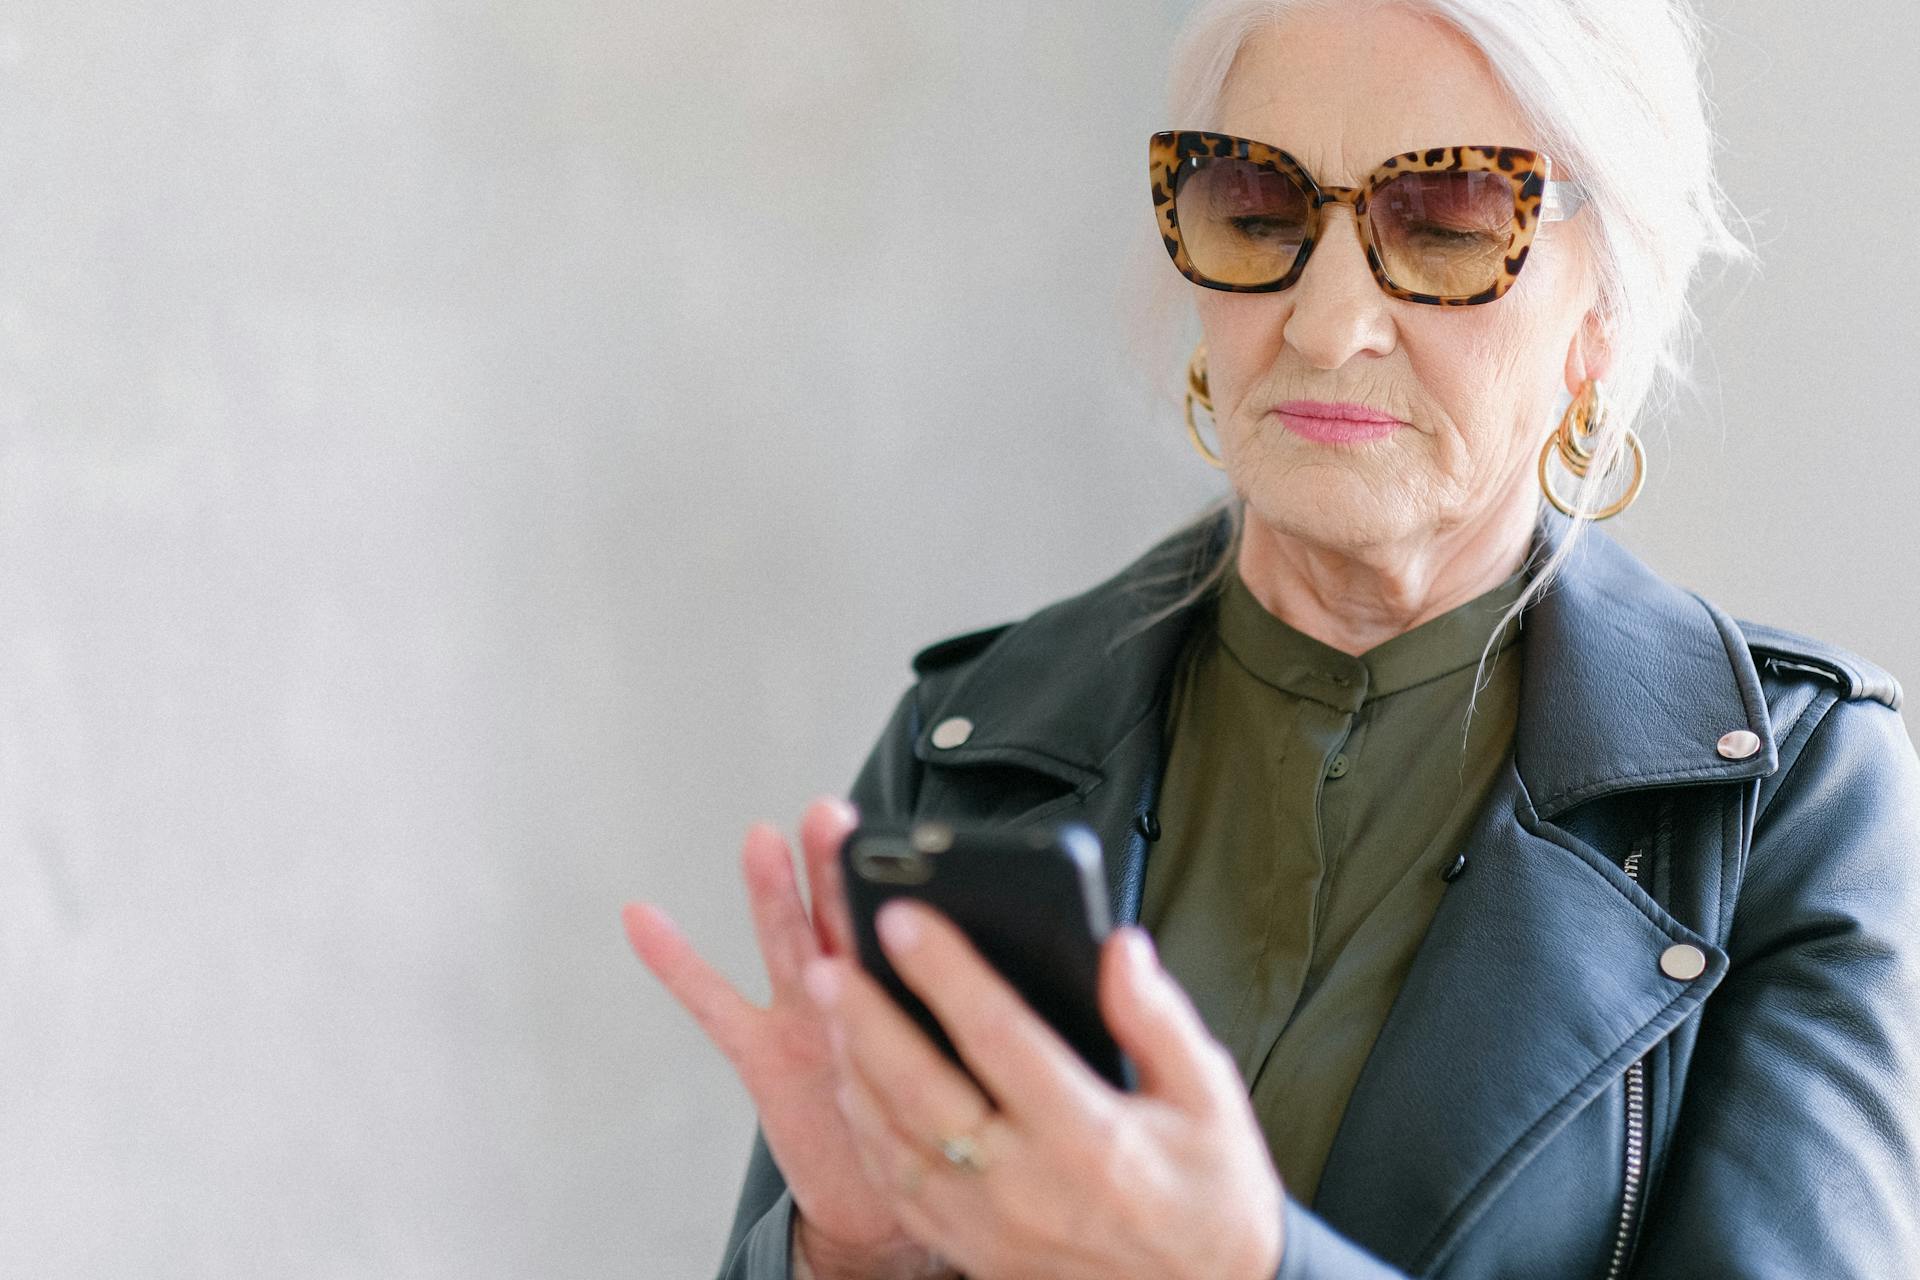 An elderly woman on the phone | Source: Pexels